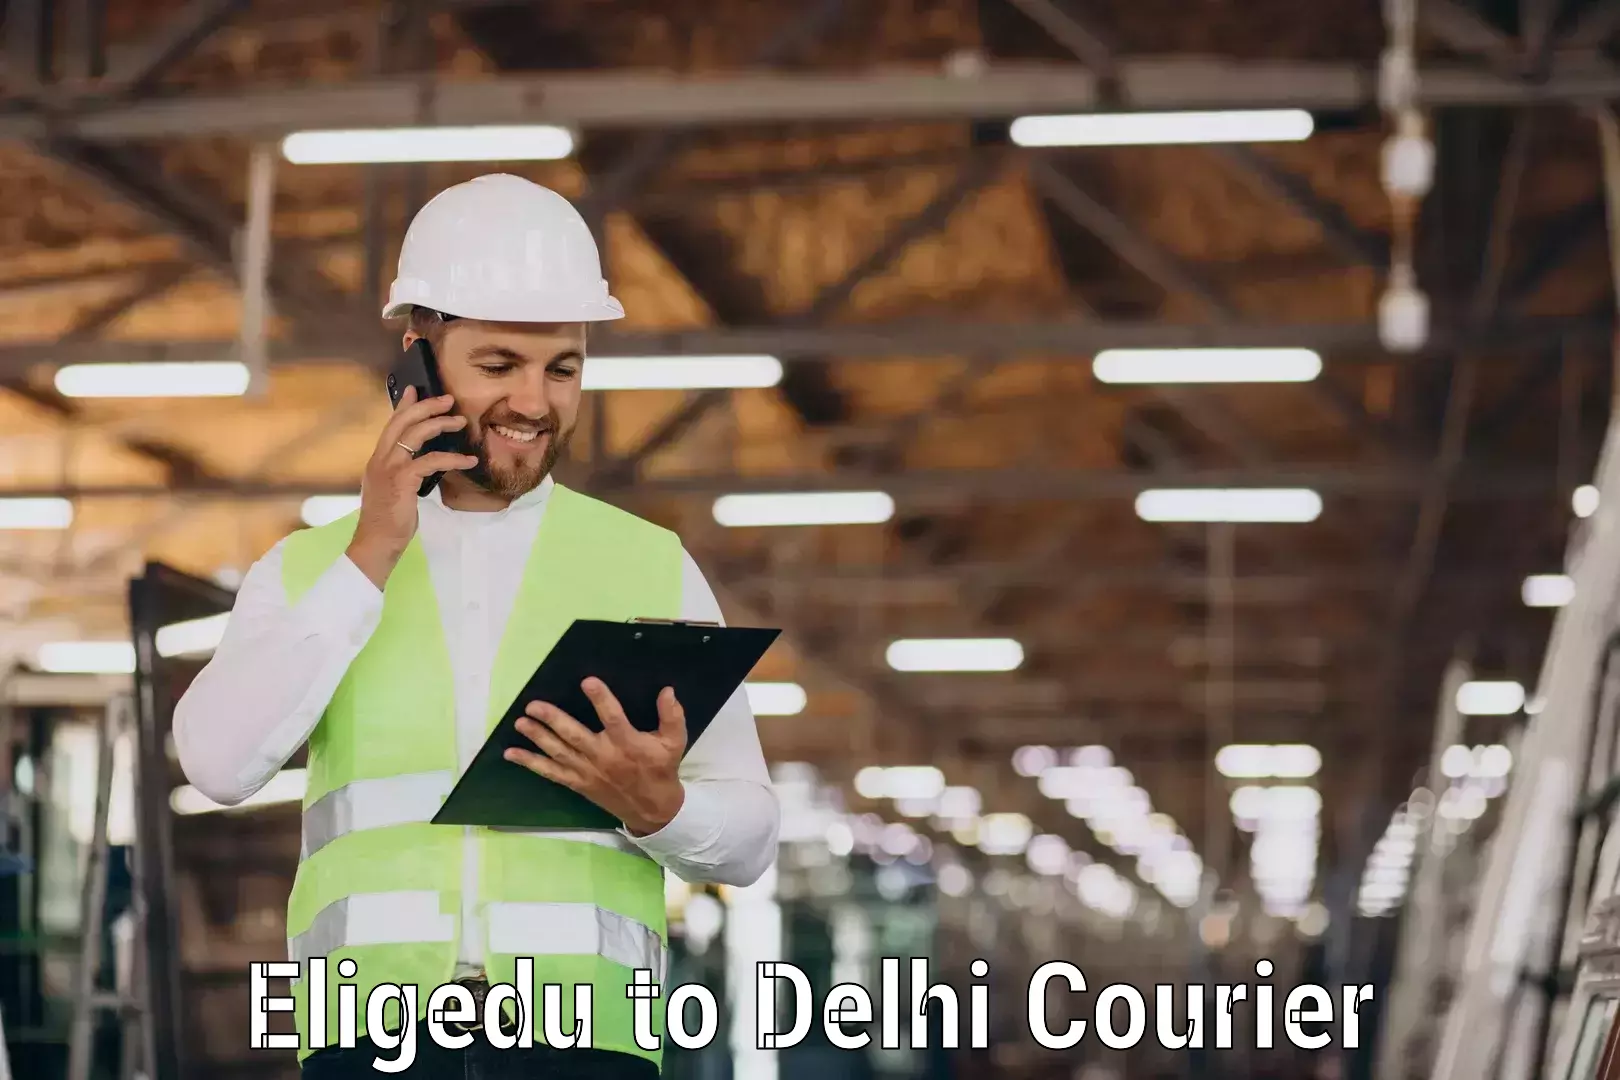 Express delivery capabilities Eligedu to East Delhi